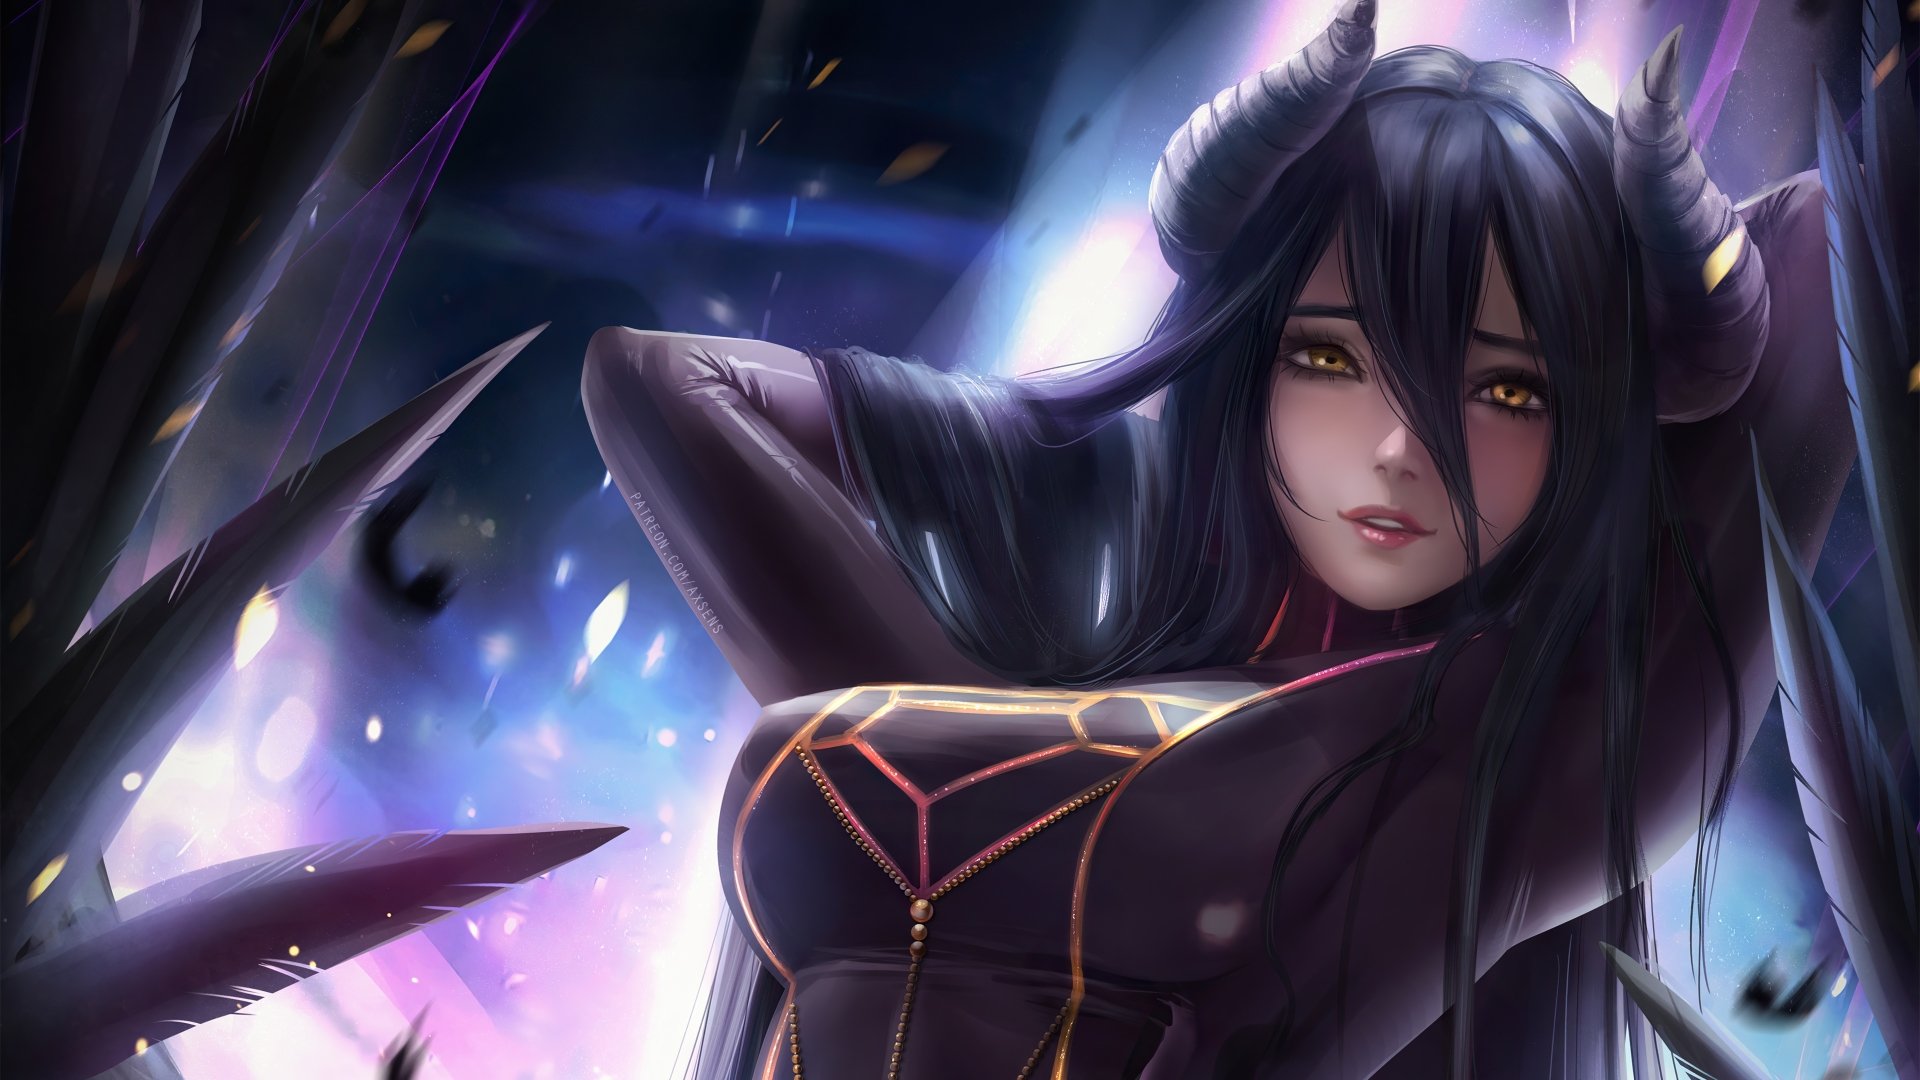 Overlord Anime Albedo Overlord Axsens Wallpaper Resolution 1920x1080